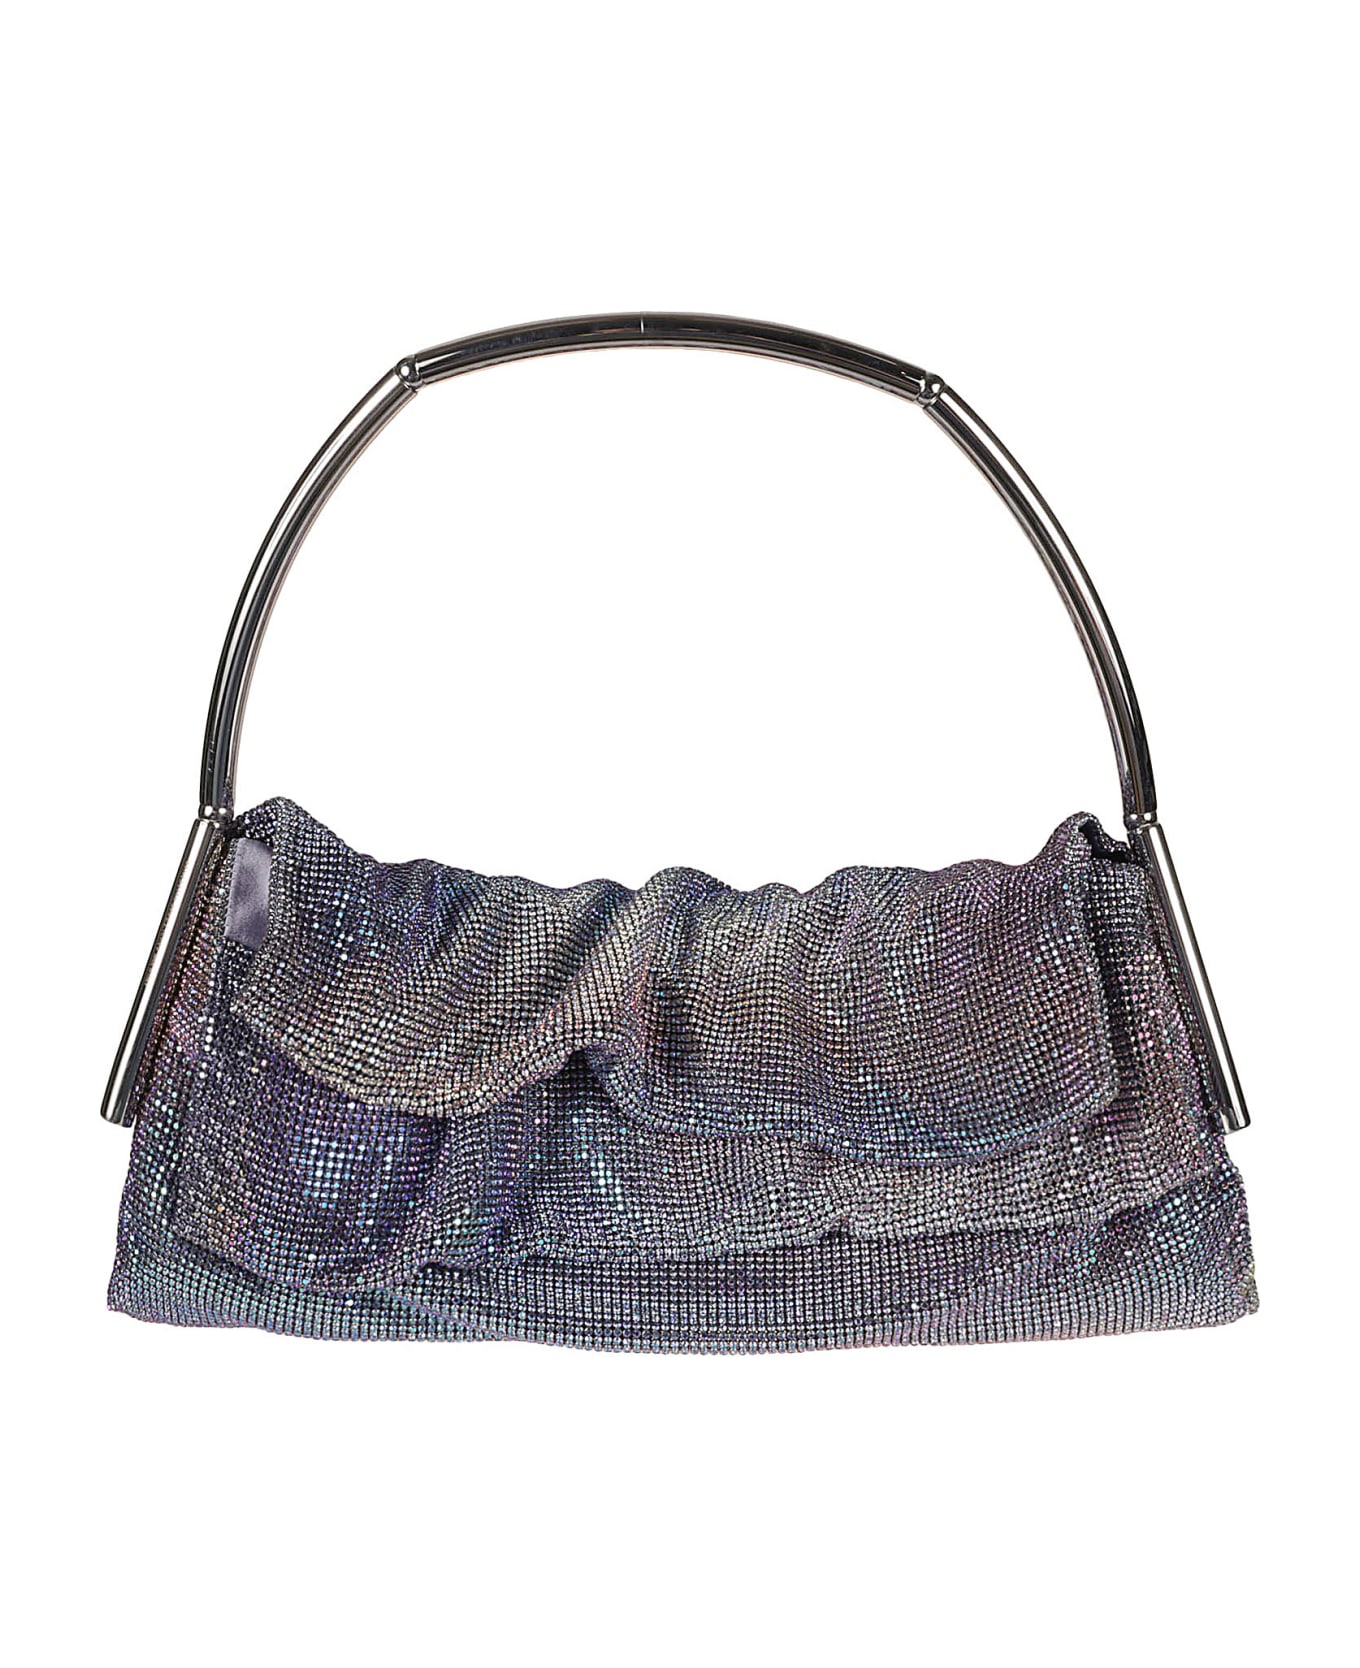 Benedetta Bruzziches Metallic Handle Embellished All-over Tote -  spectre トートバッグ